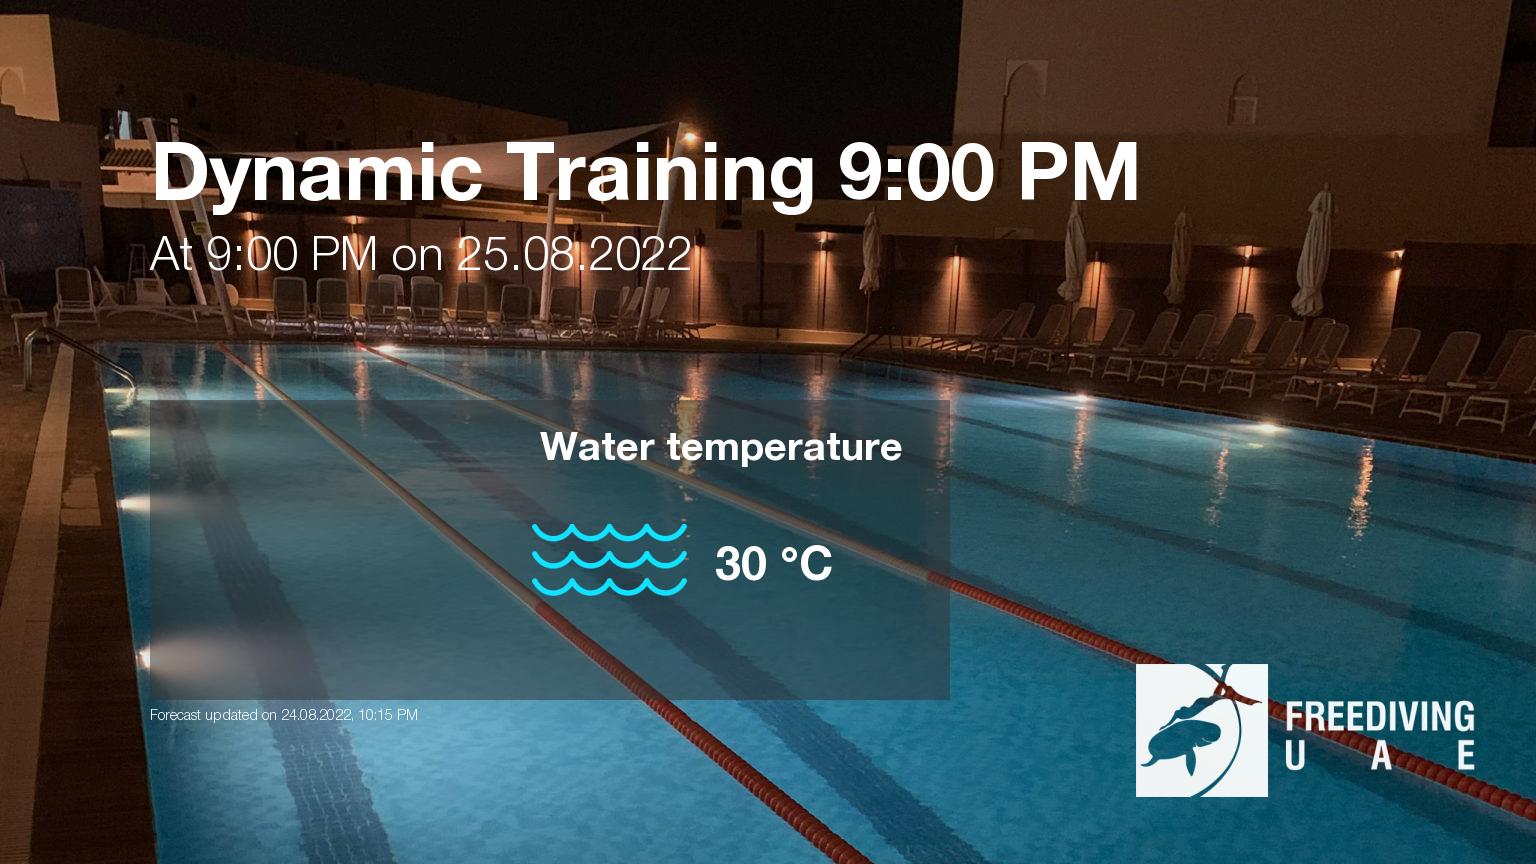 Expected weather during Dynamic Training 9:00 PM on Thu, Aug 25, at 9:00 PM